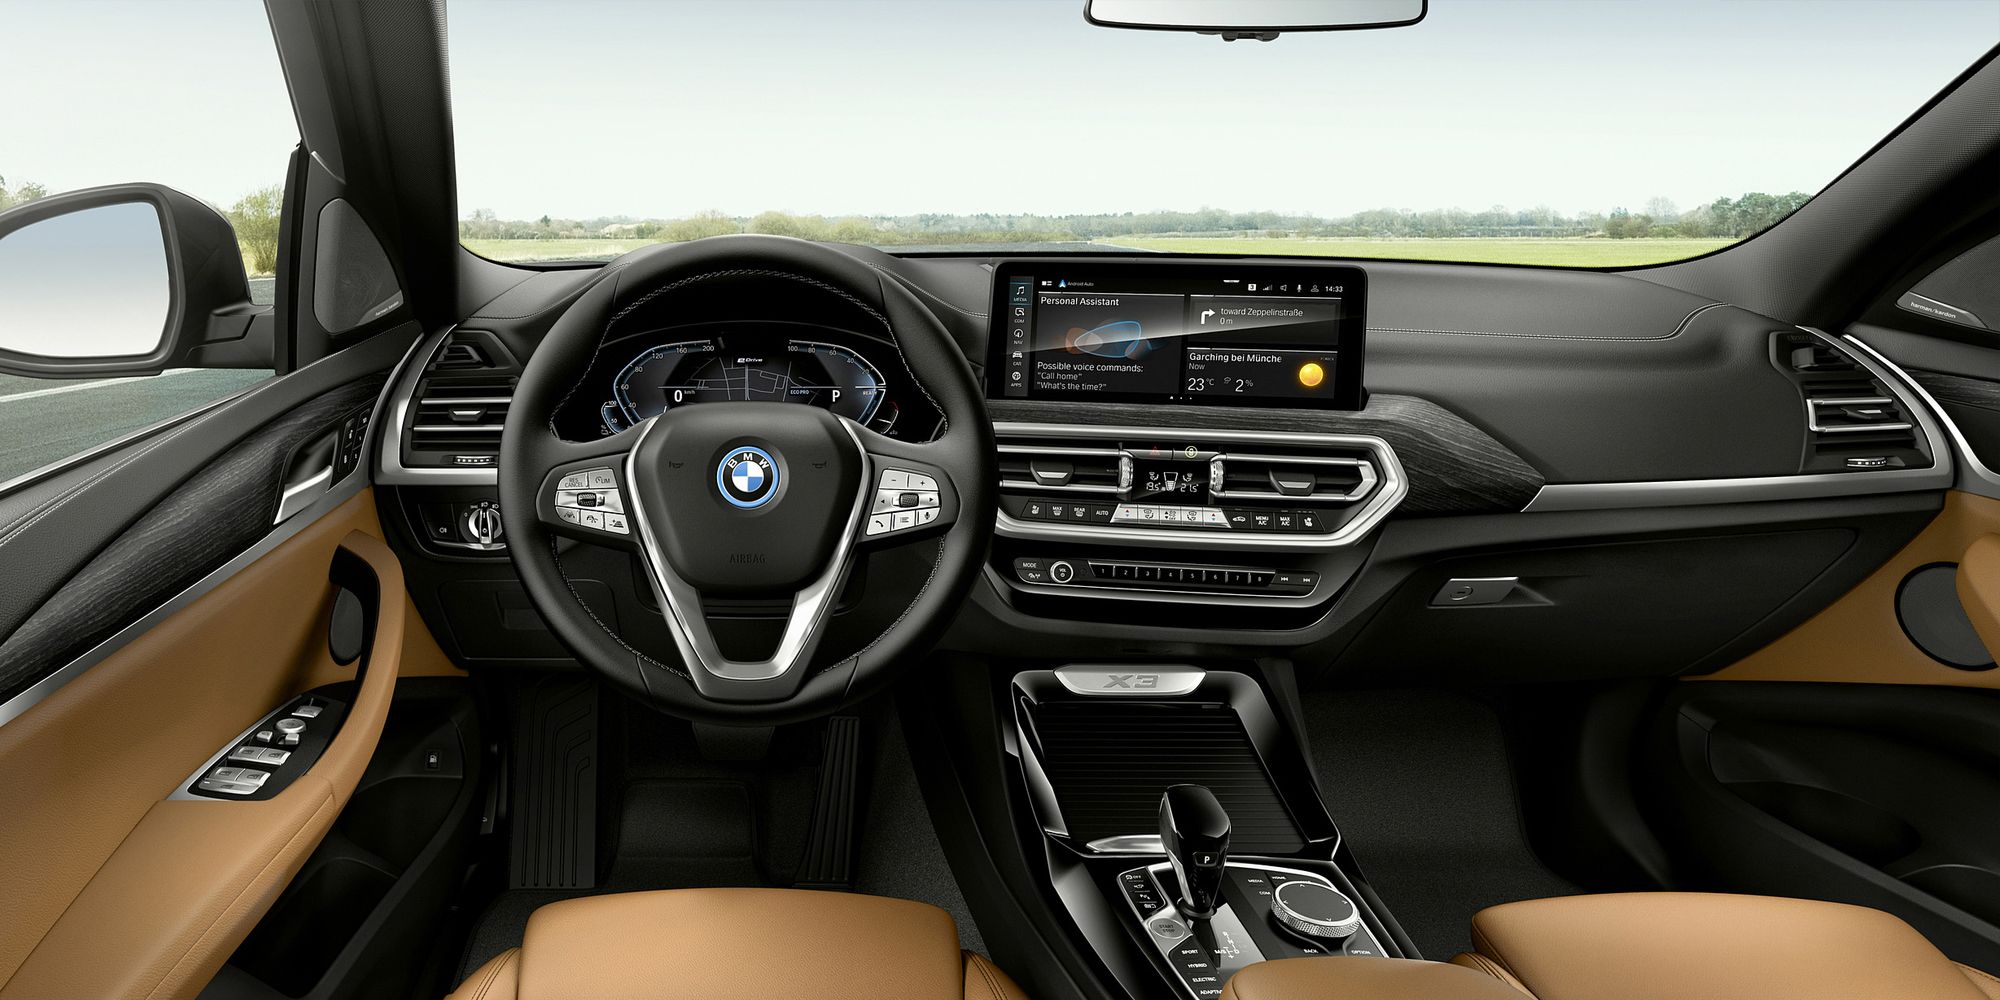 The interior of the new X3